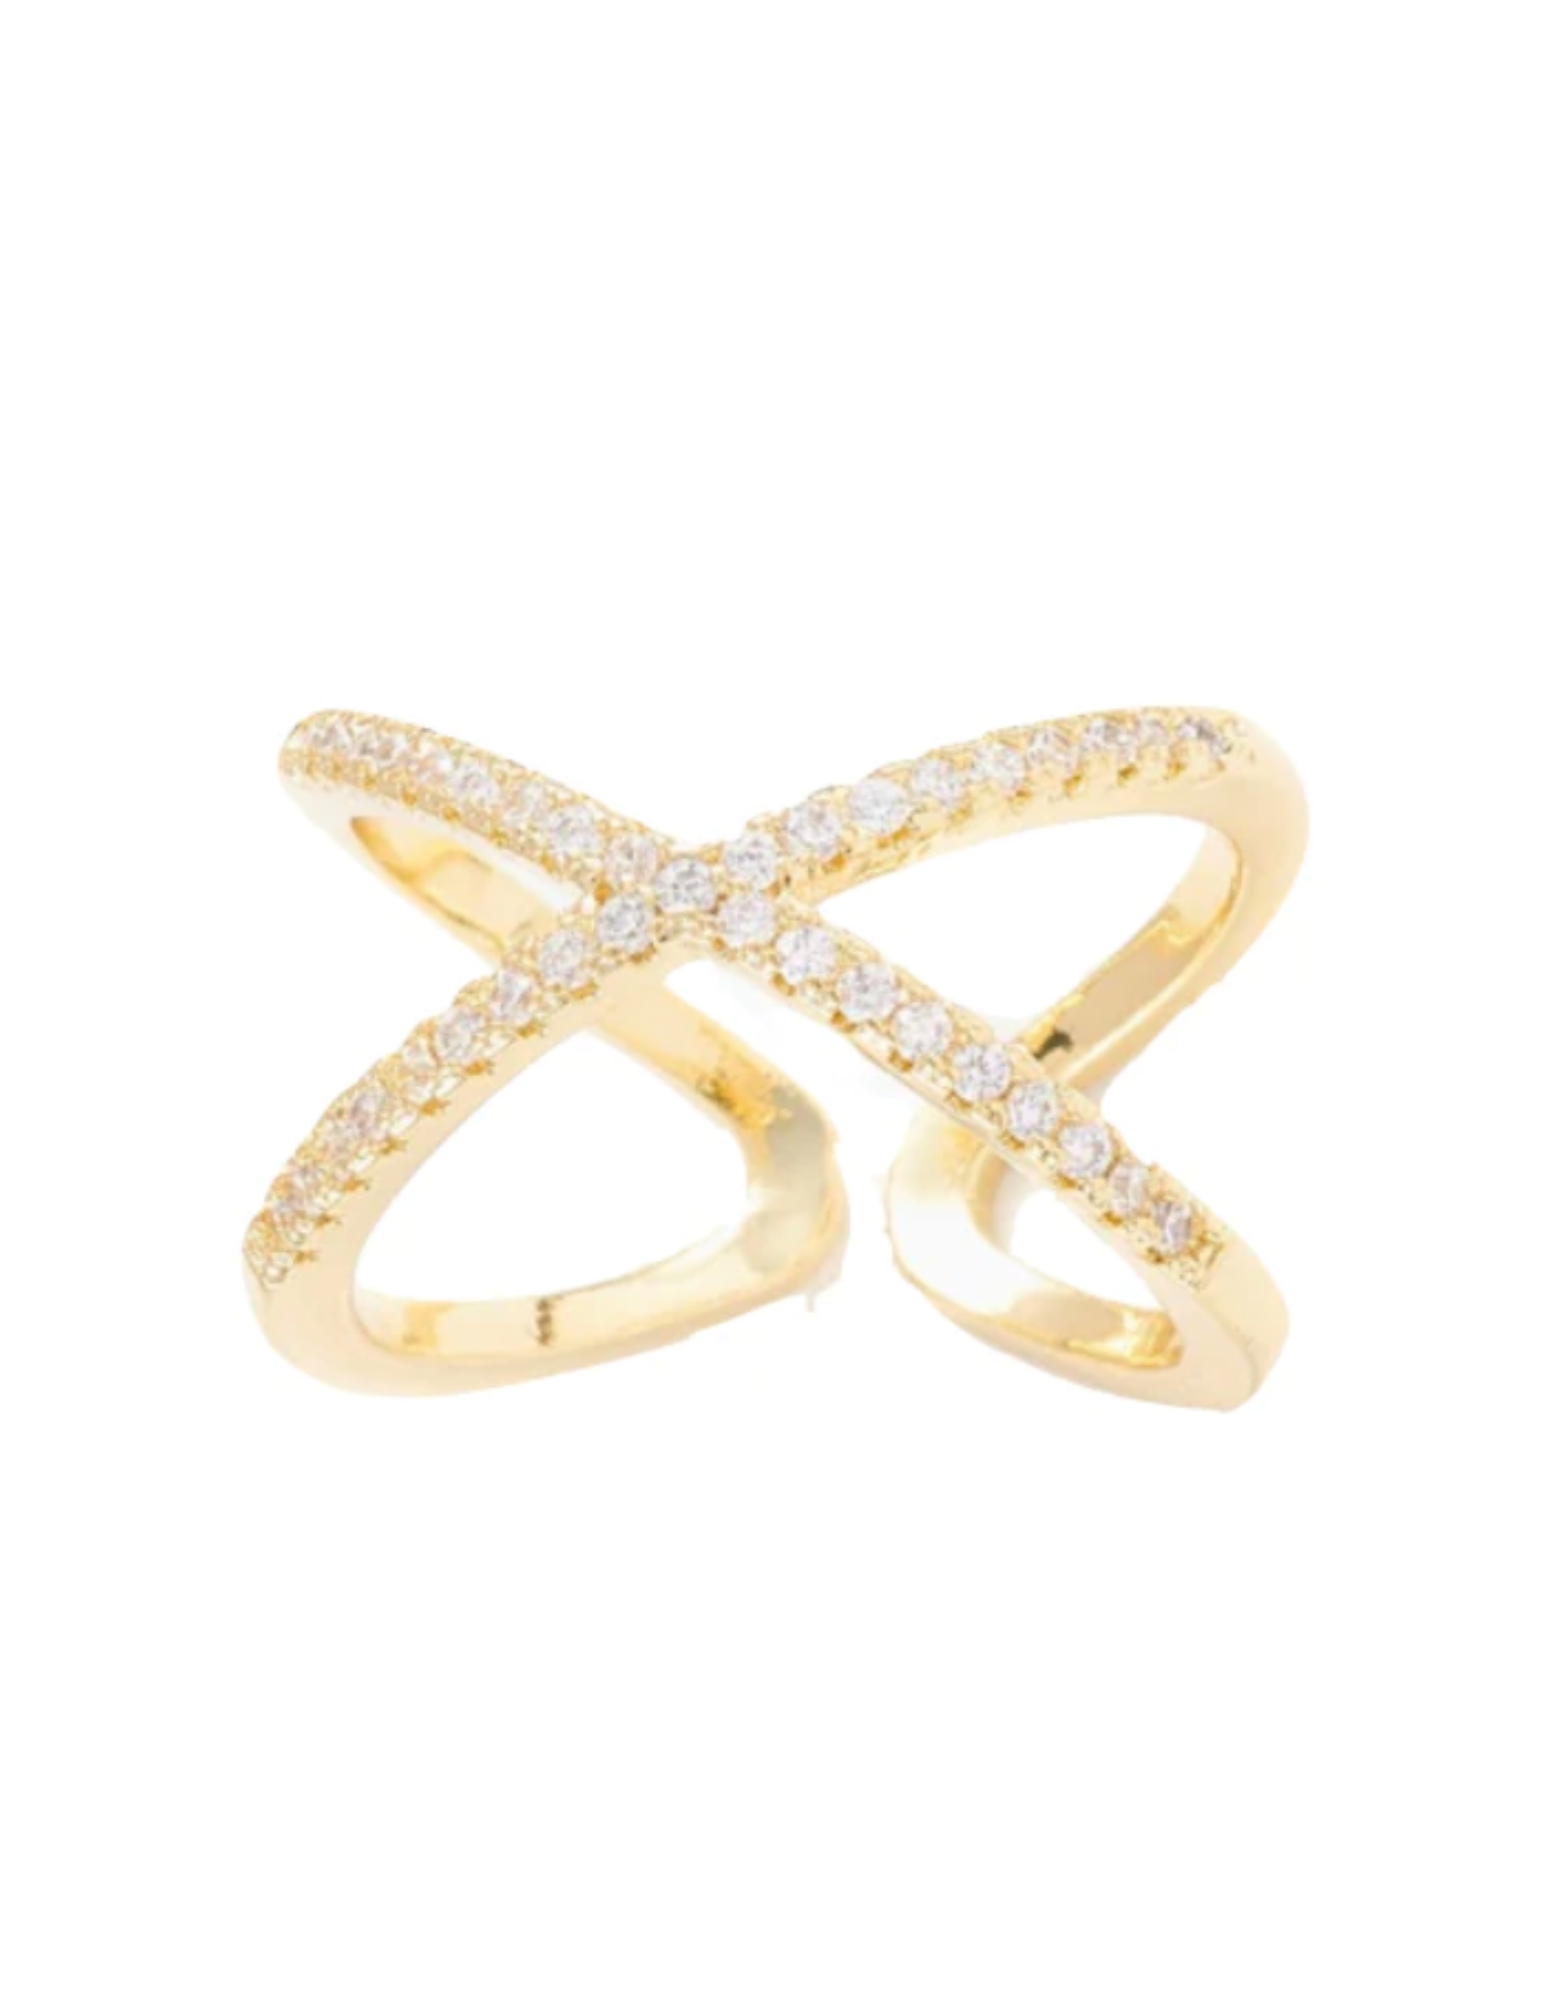 Criss Cross Pave Ring